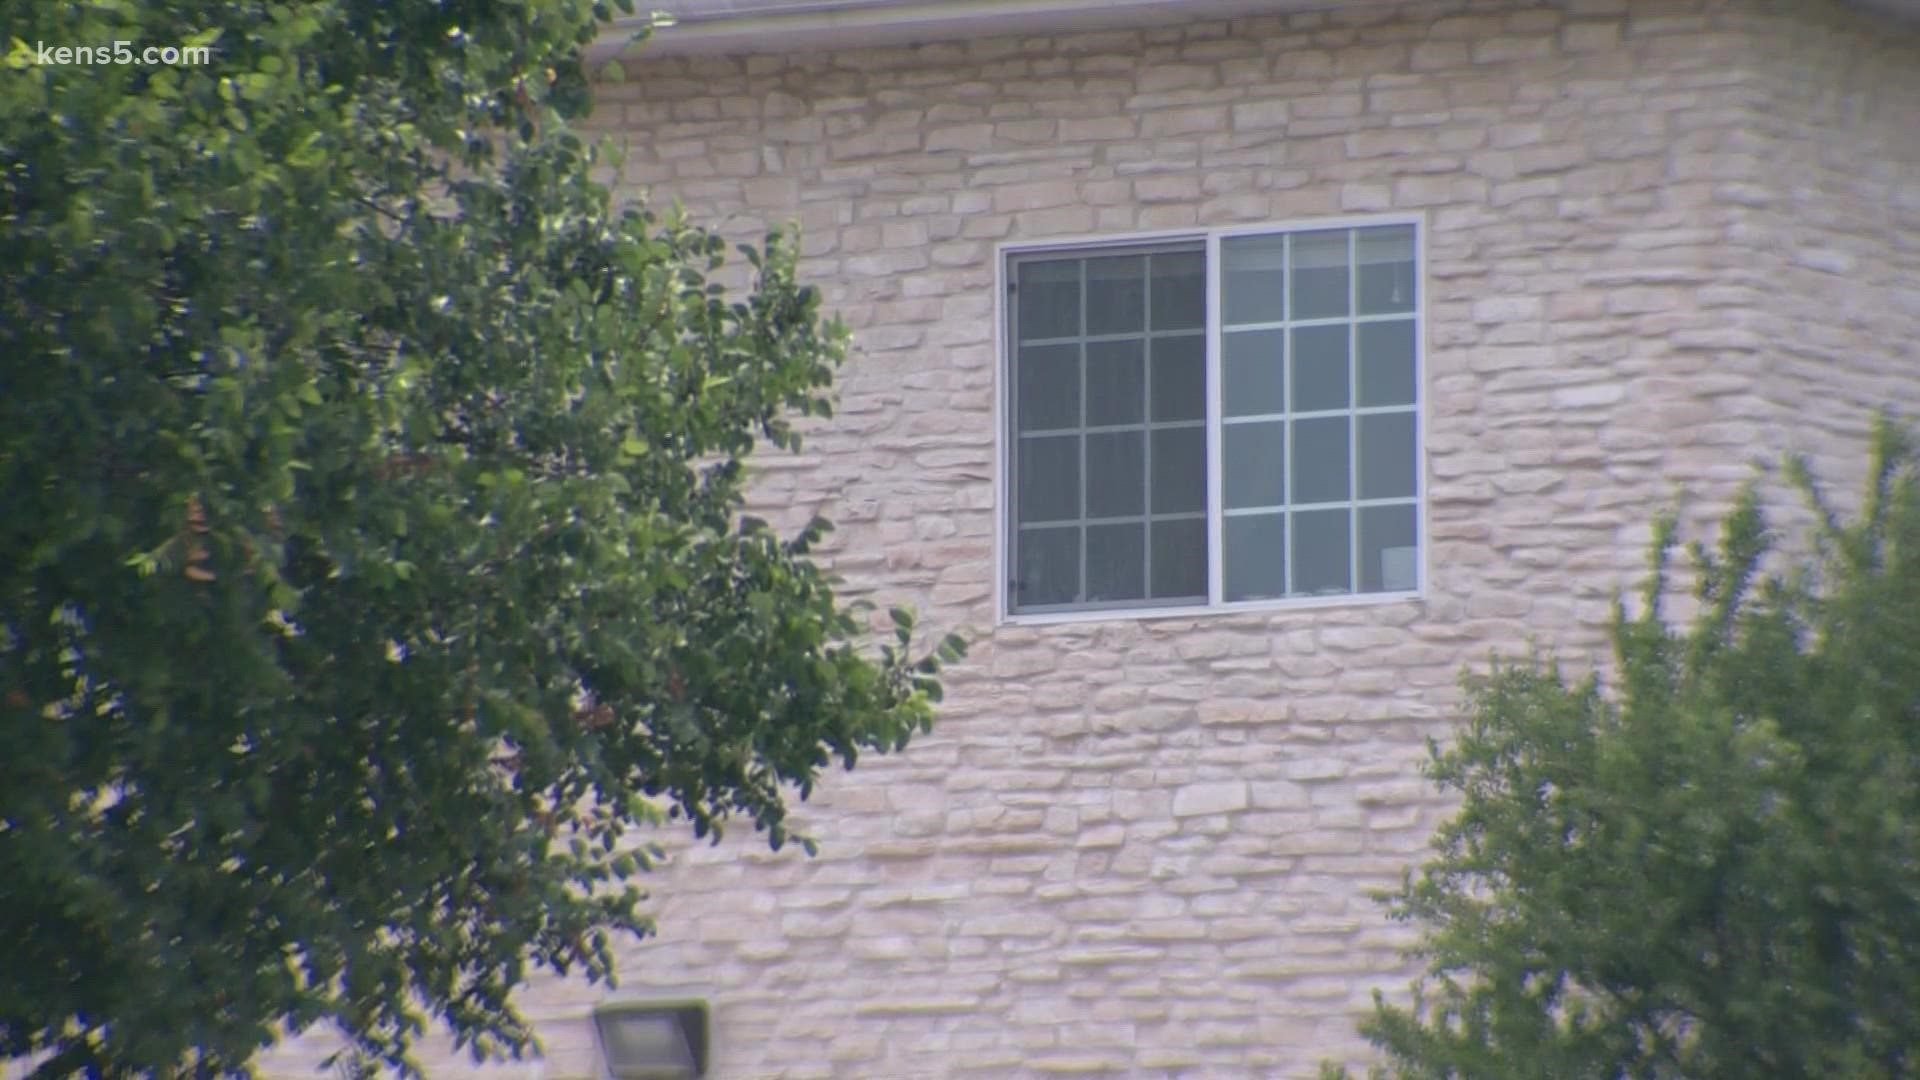 The incident happened at The Reserve Apartments off Babcock Road, just a mile from the main campus at UTSA.